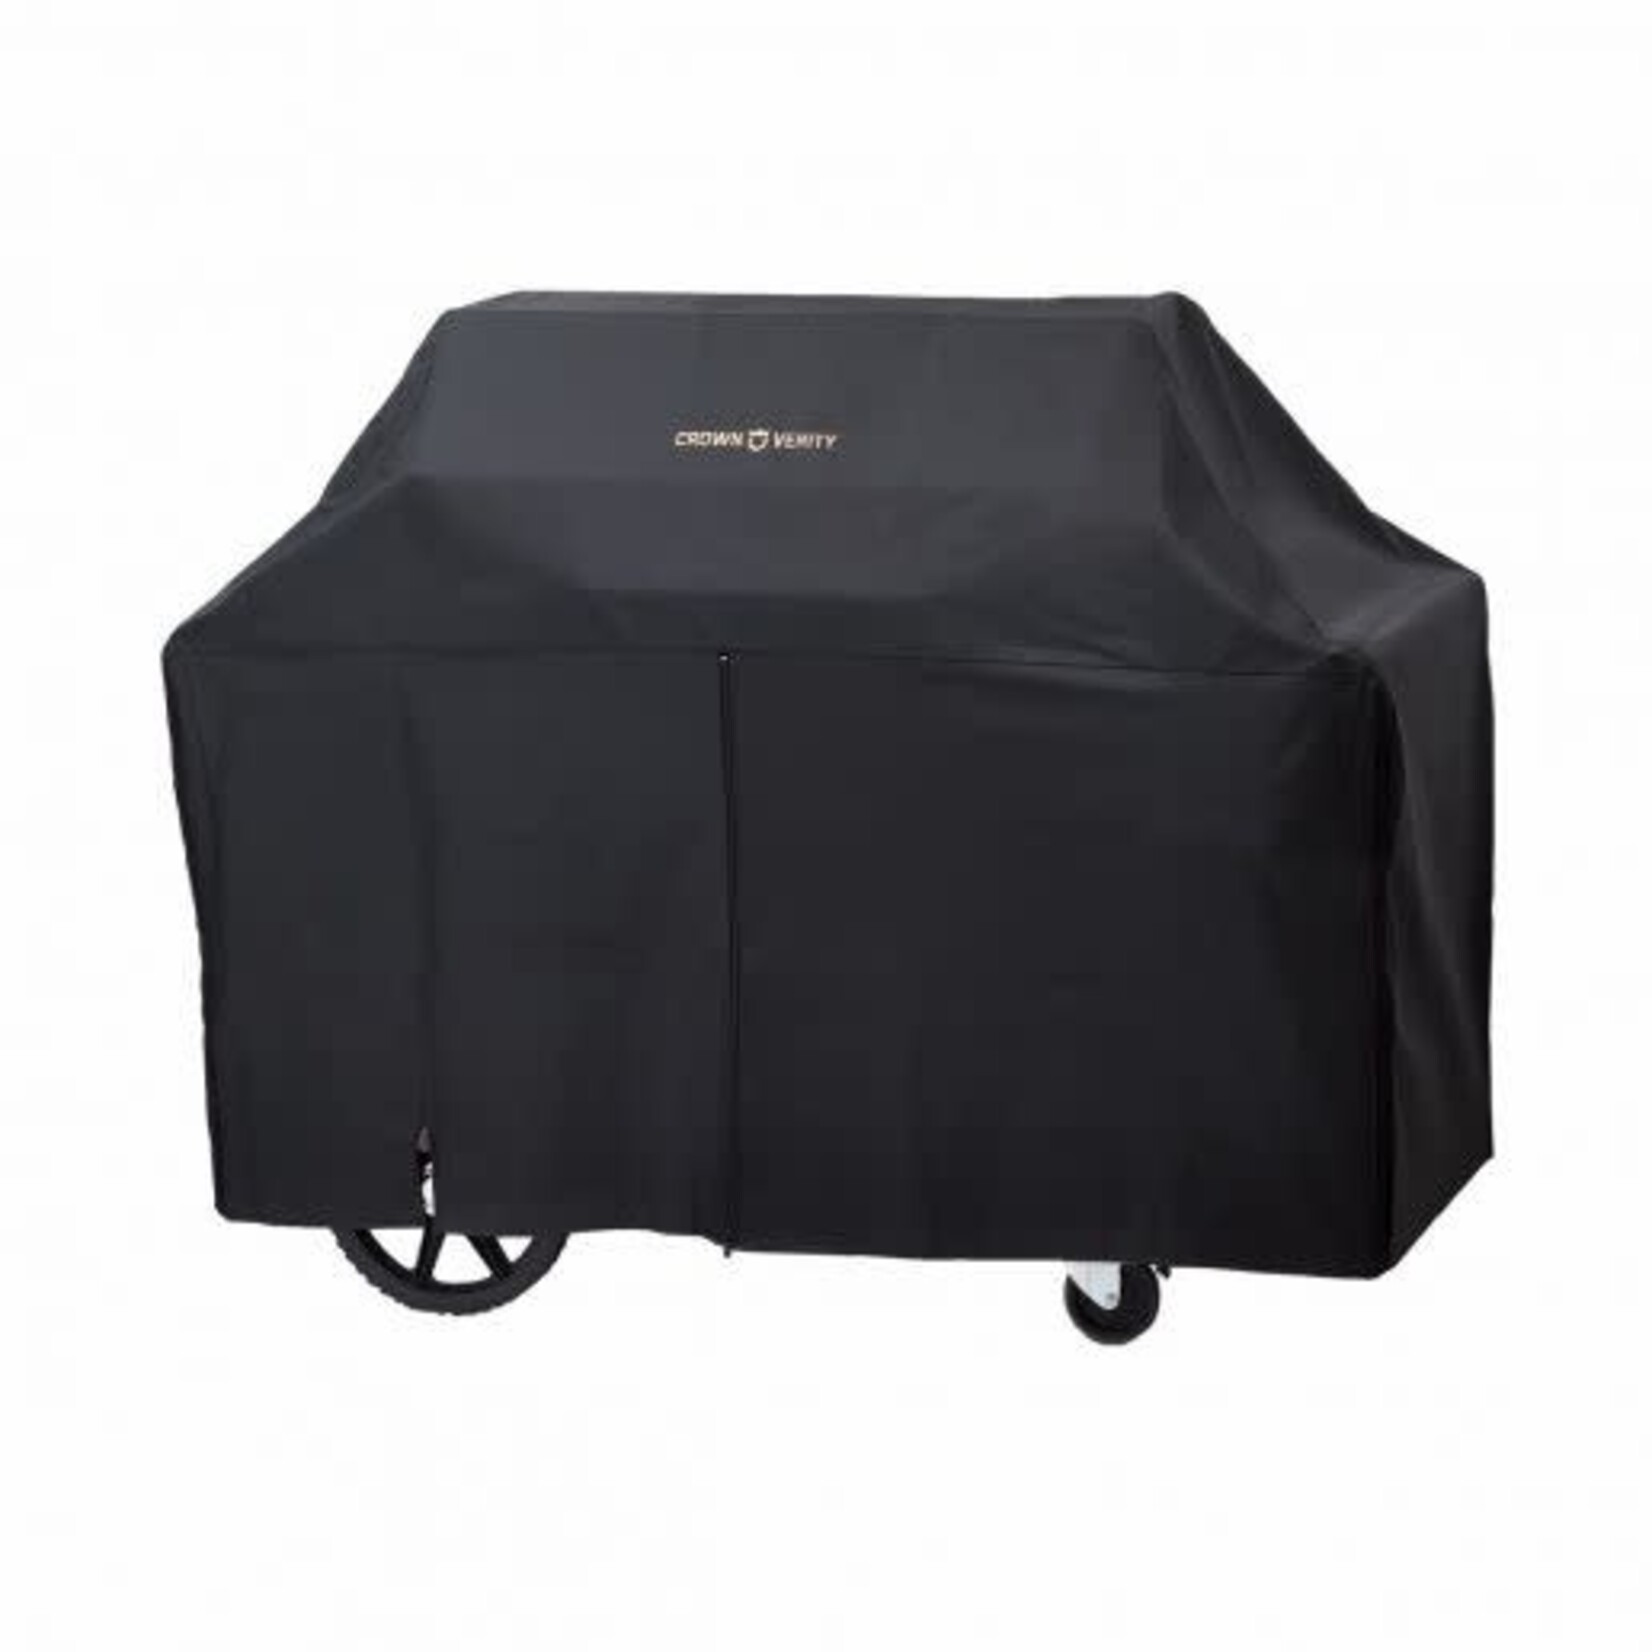 Crown Verity 72" Grill Cover